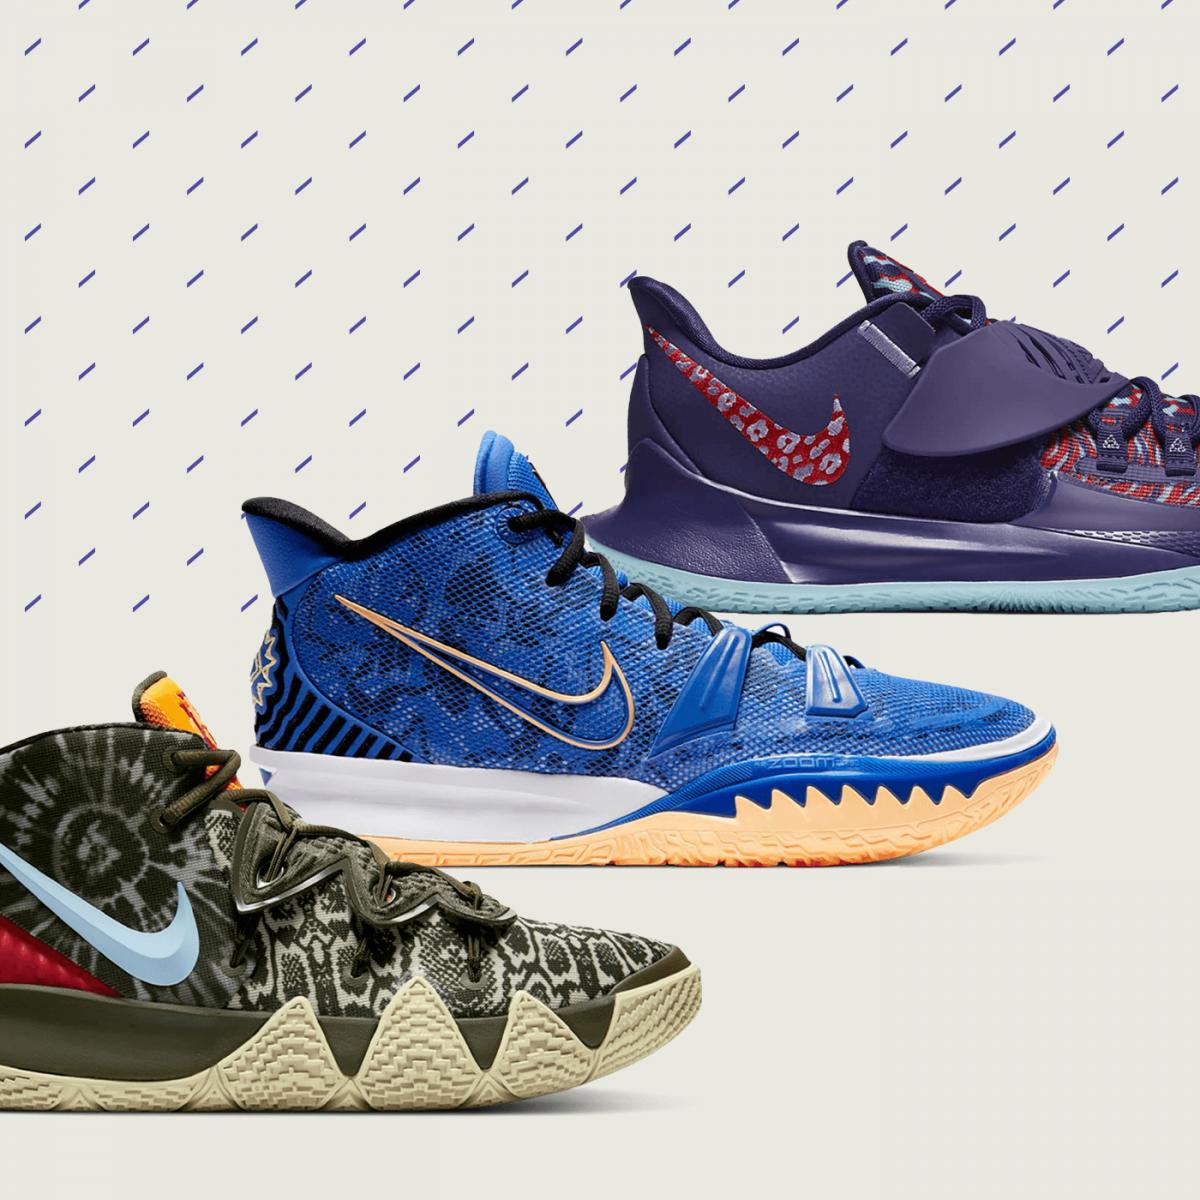 most affordable kyrie shoes